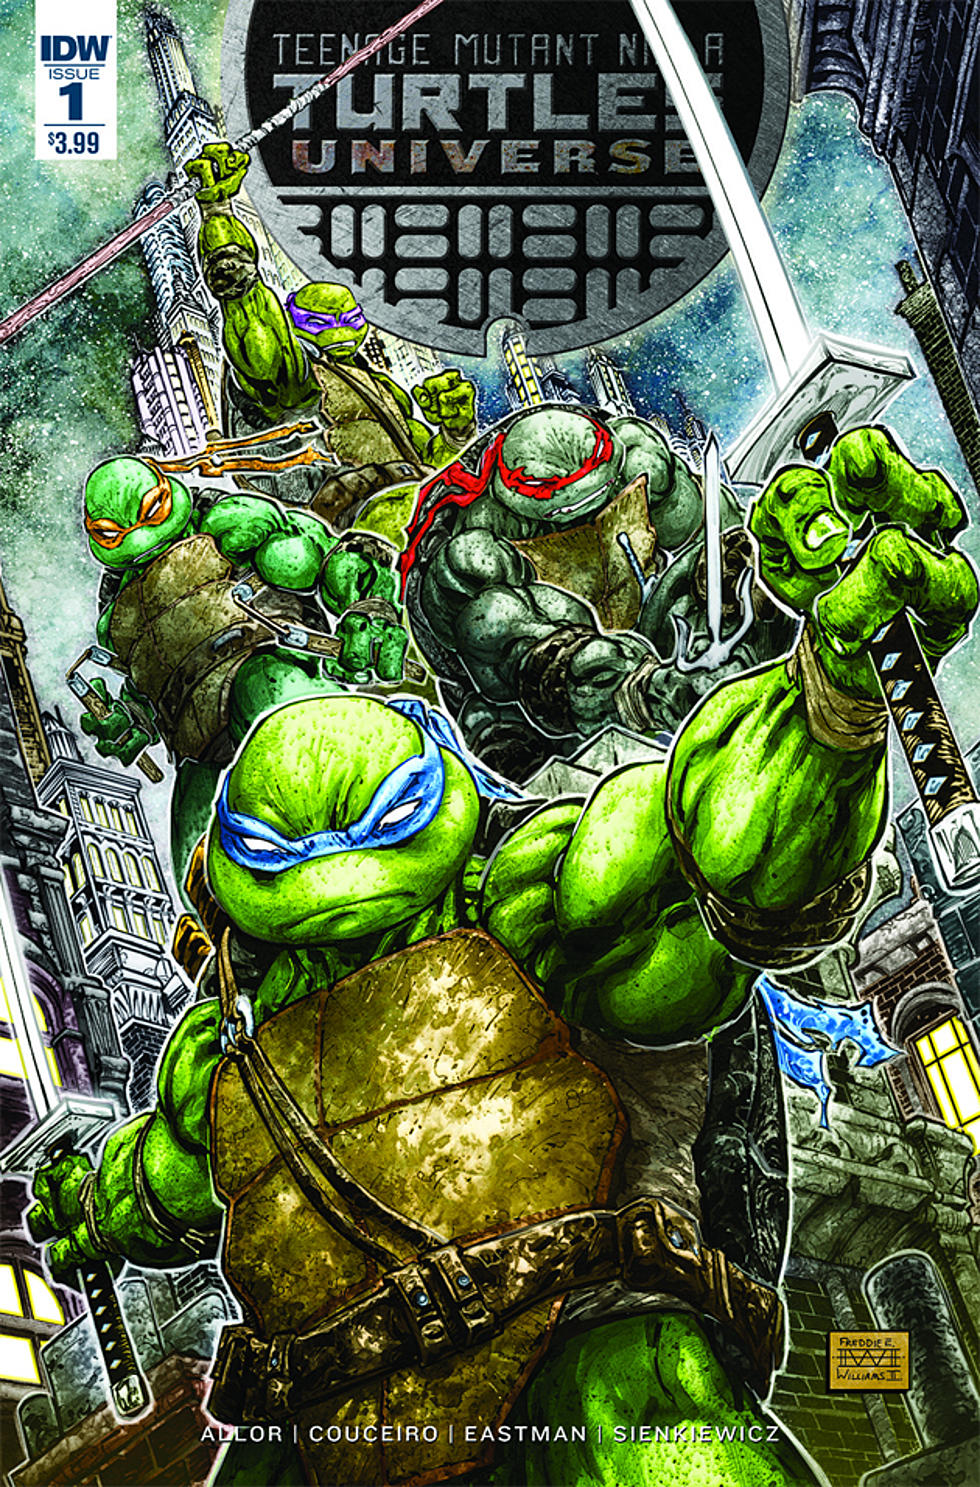 IDW Announces The New, Ongoing &#8216;Teenage Mutant Ninja Turtles Universe&#8217; Series